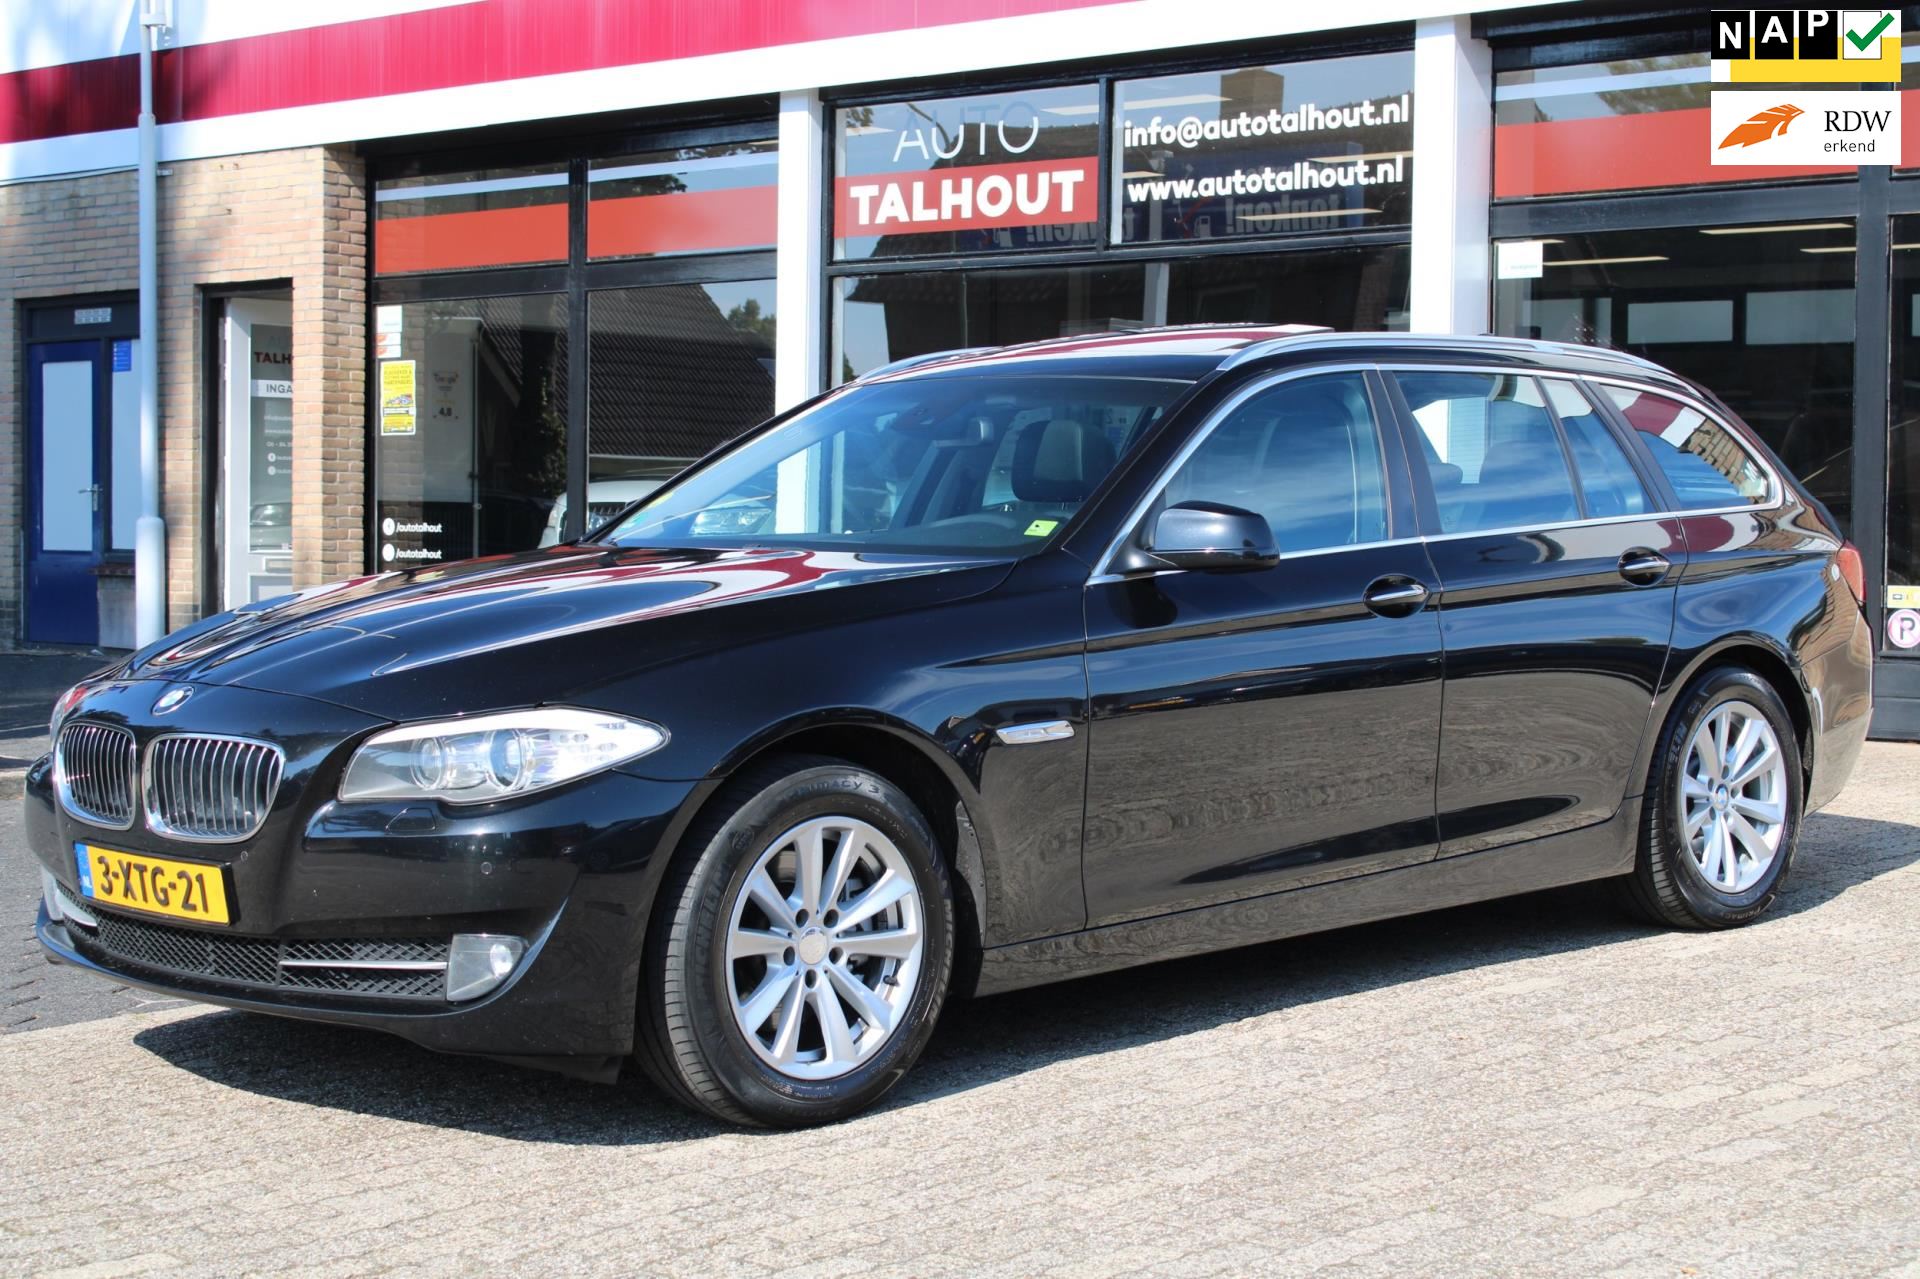 BMW 5-serie Touring occasion - Auto Talhout